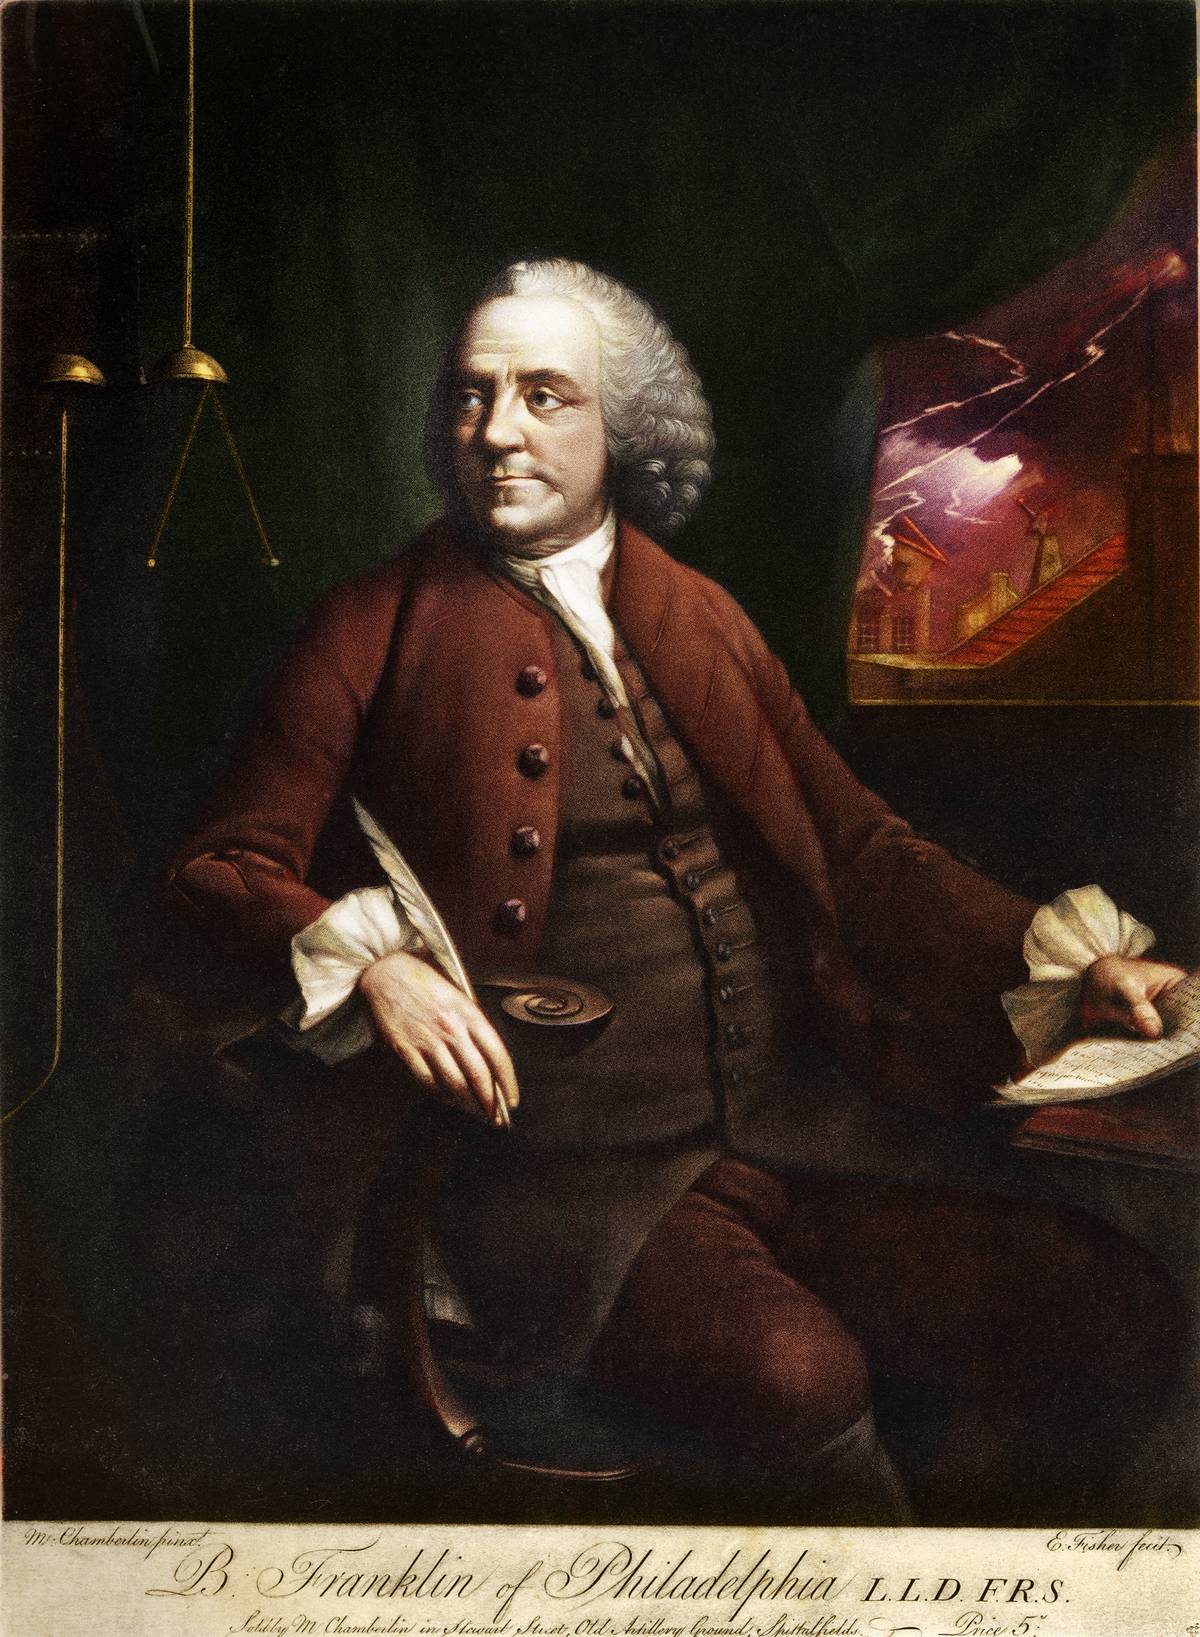 <p>In 1776, Benjamin Franklin was sent to France on a mission to acquire aid for the revolutionary cause. To dispel French misconceptions of Americans as rustic frontiersmen, he sported plain clothing and a fur hat - an image that became immortalized in his numerous portraits. </p> <p>This look also inspired Frenchwomen to wear large wigs fashioned into "coiffure à la Franklin". Upon signing the treaty between France and the United States in 1778, Franklin wore white headgear; even men followed this fashion trend.</p>